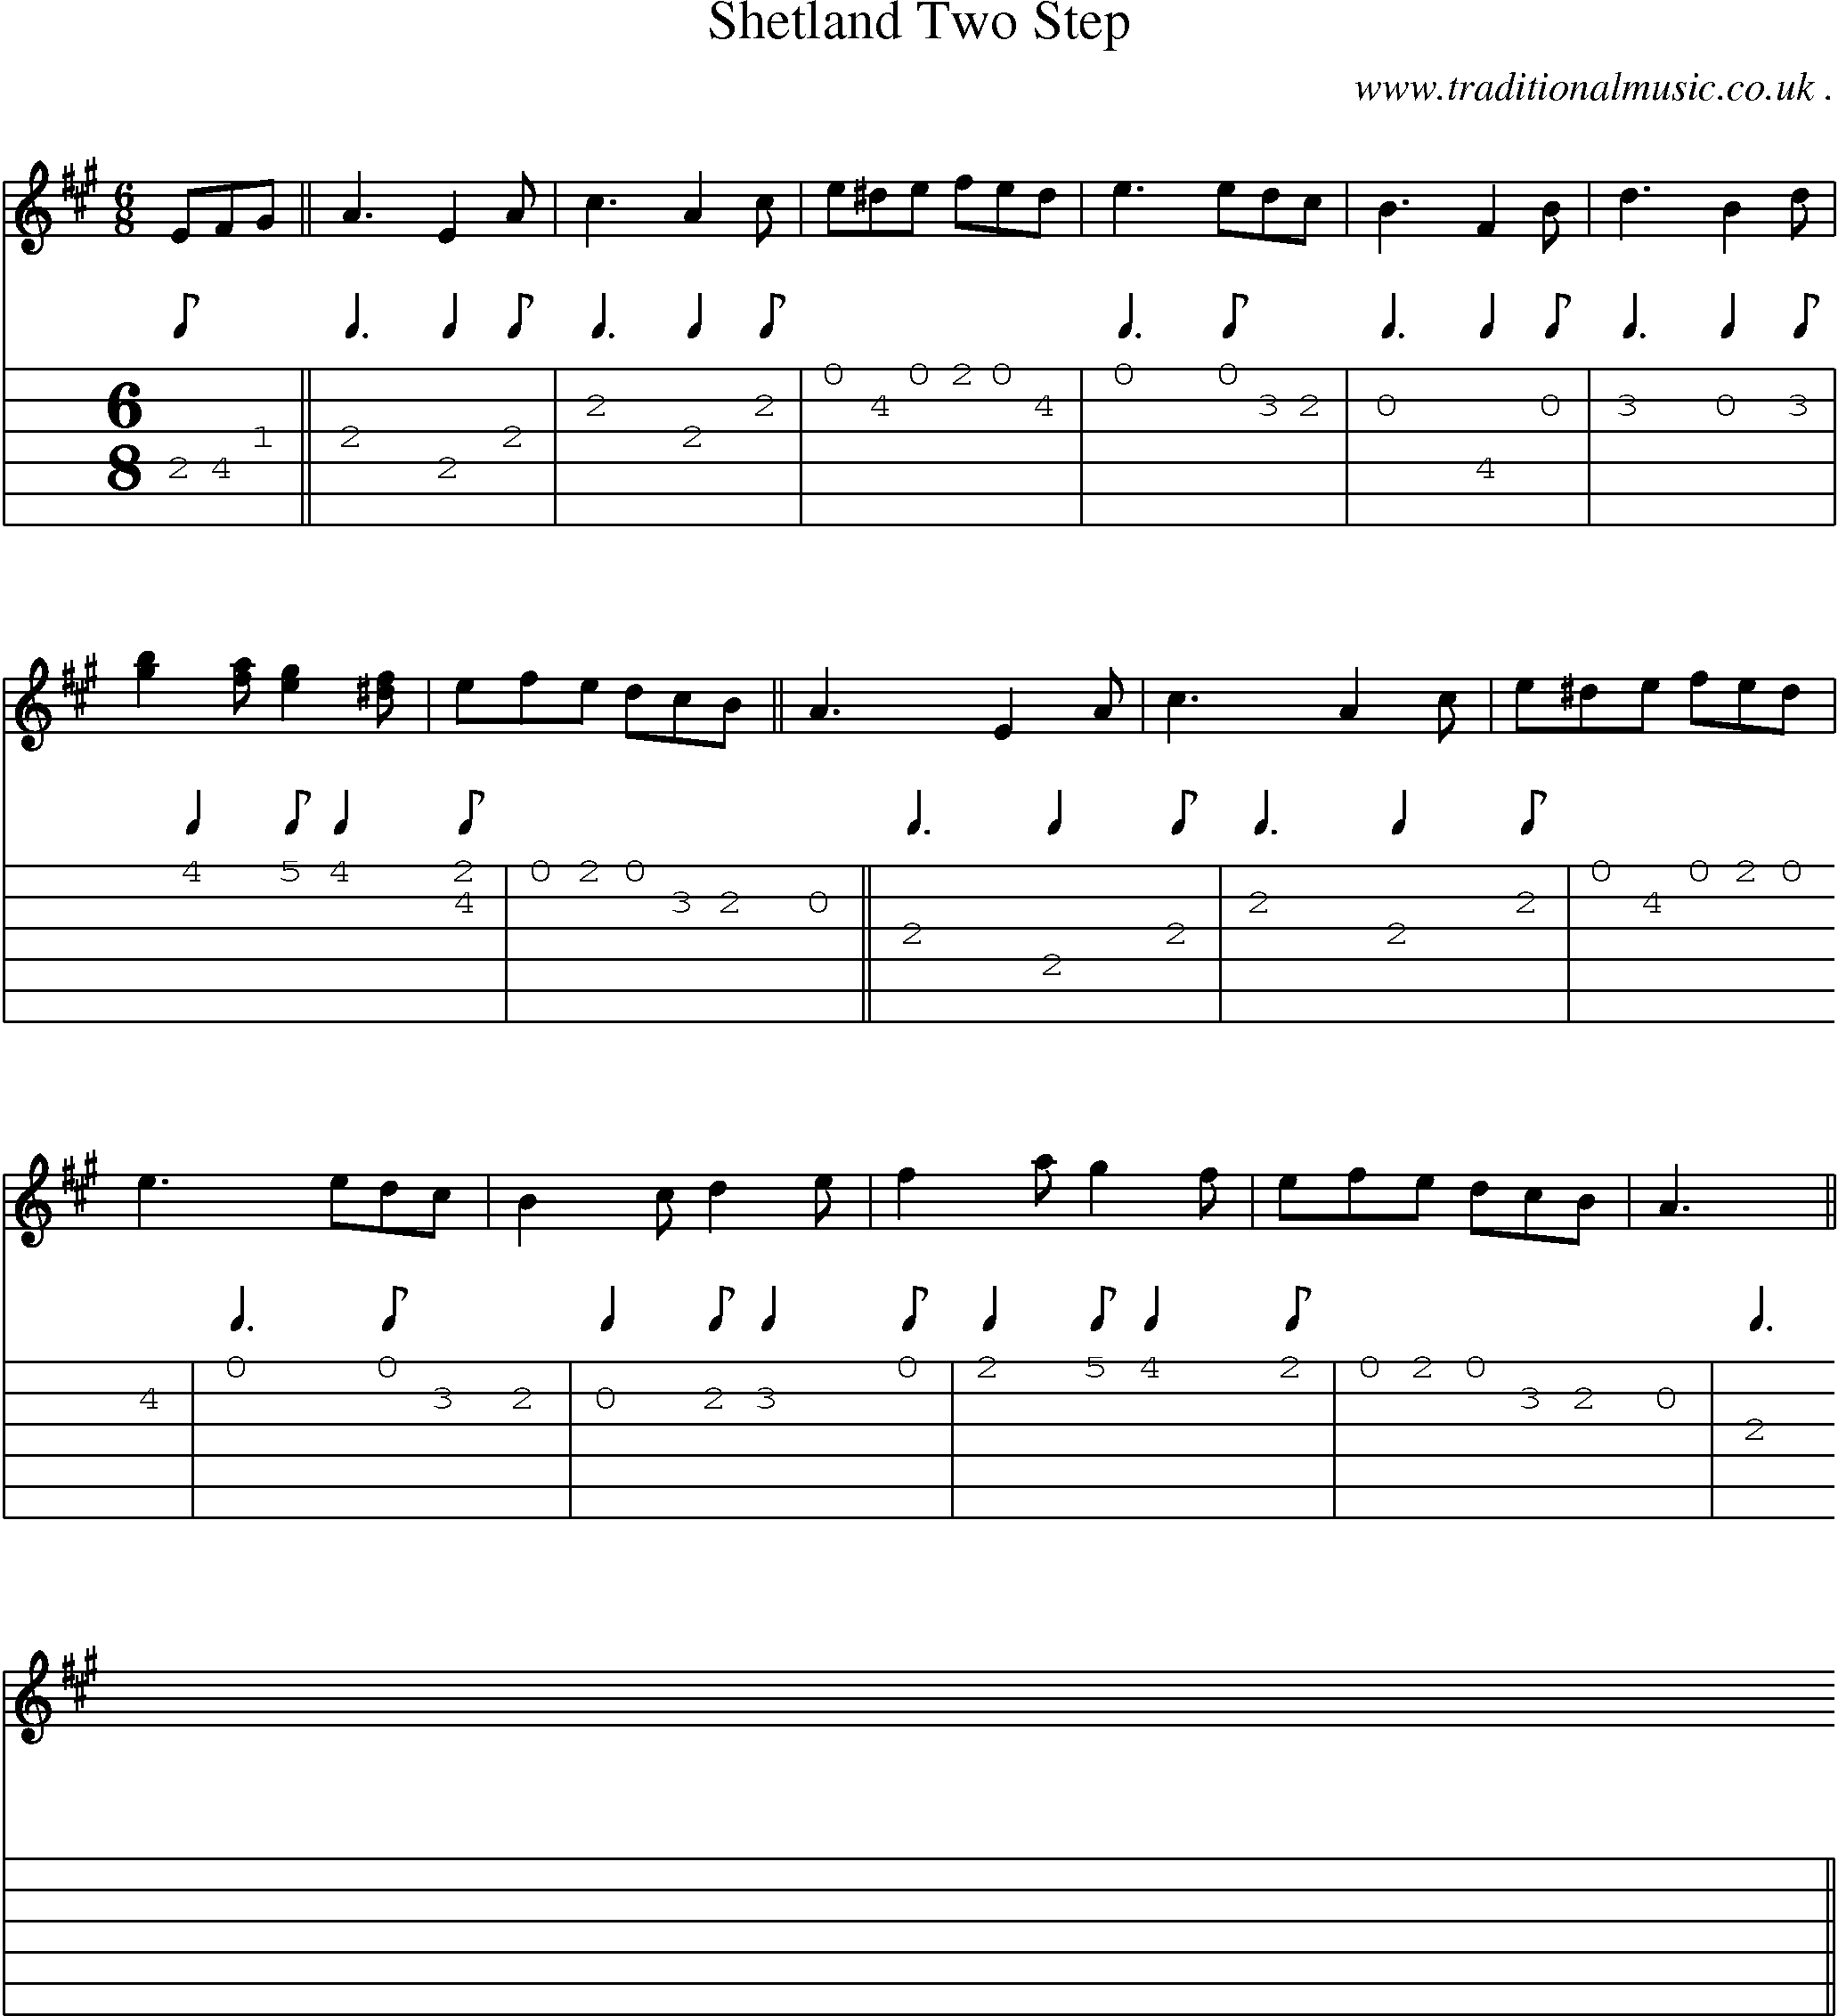 Sheet-music  score, Chords and Guitar Tabs for Shetland Two Step